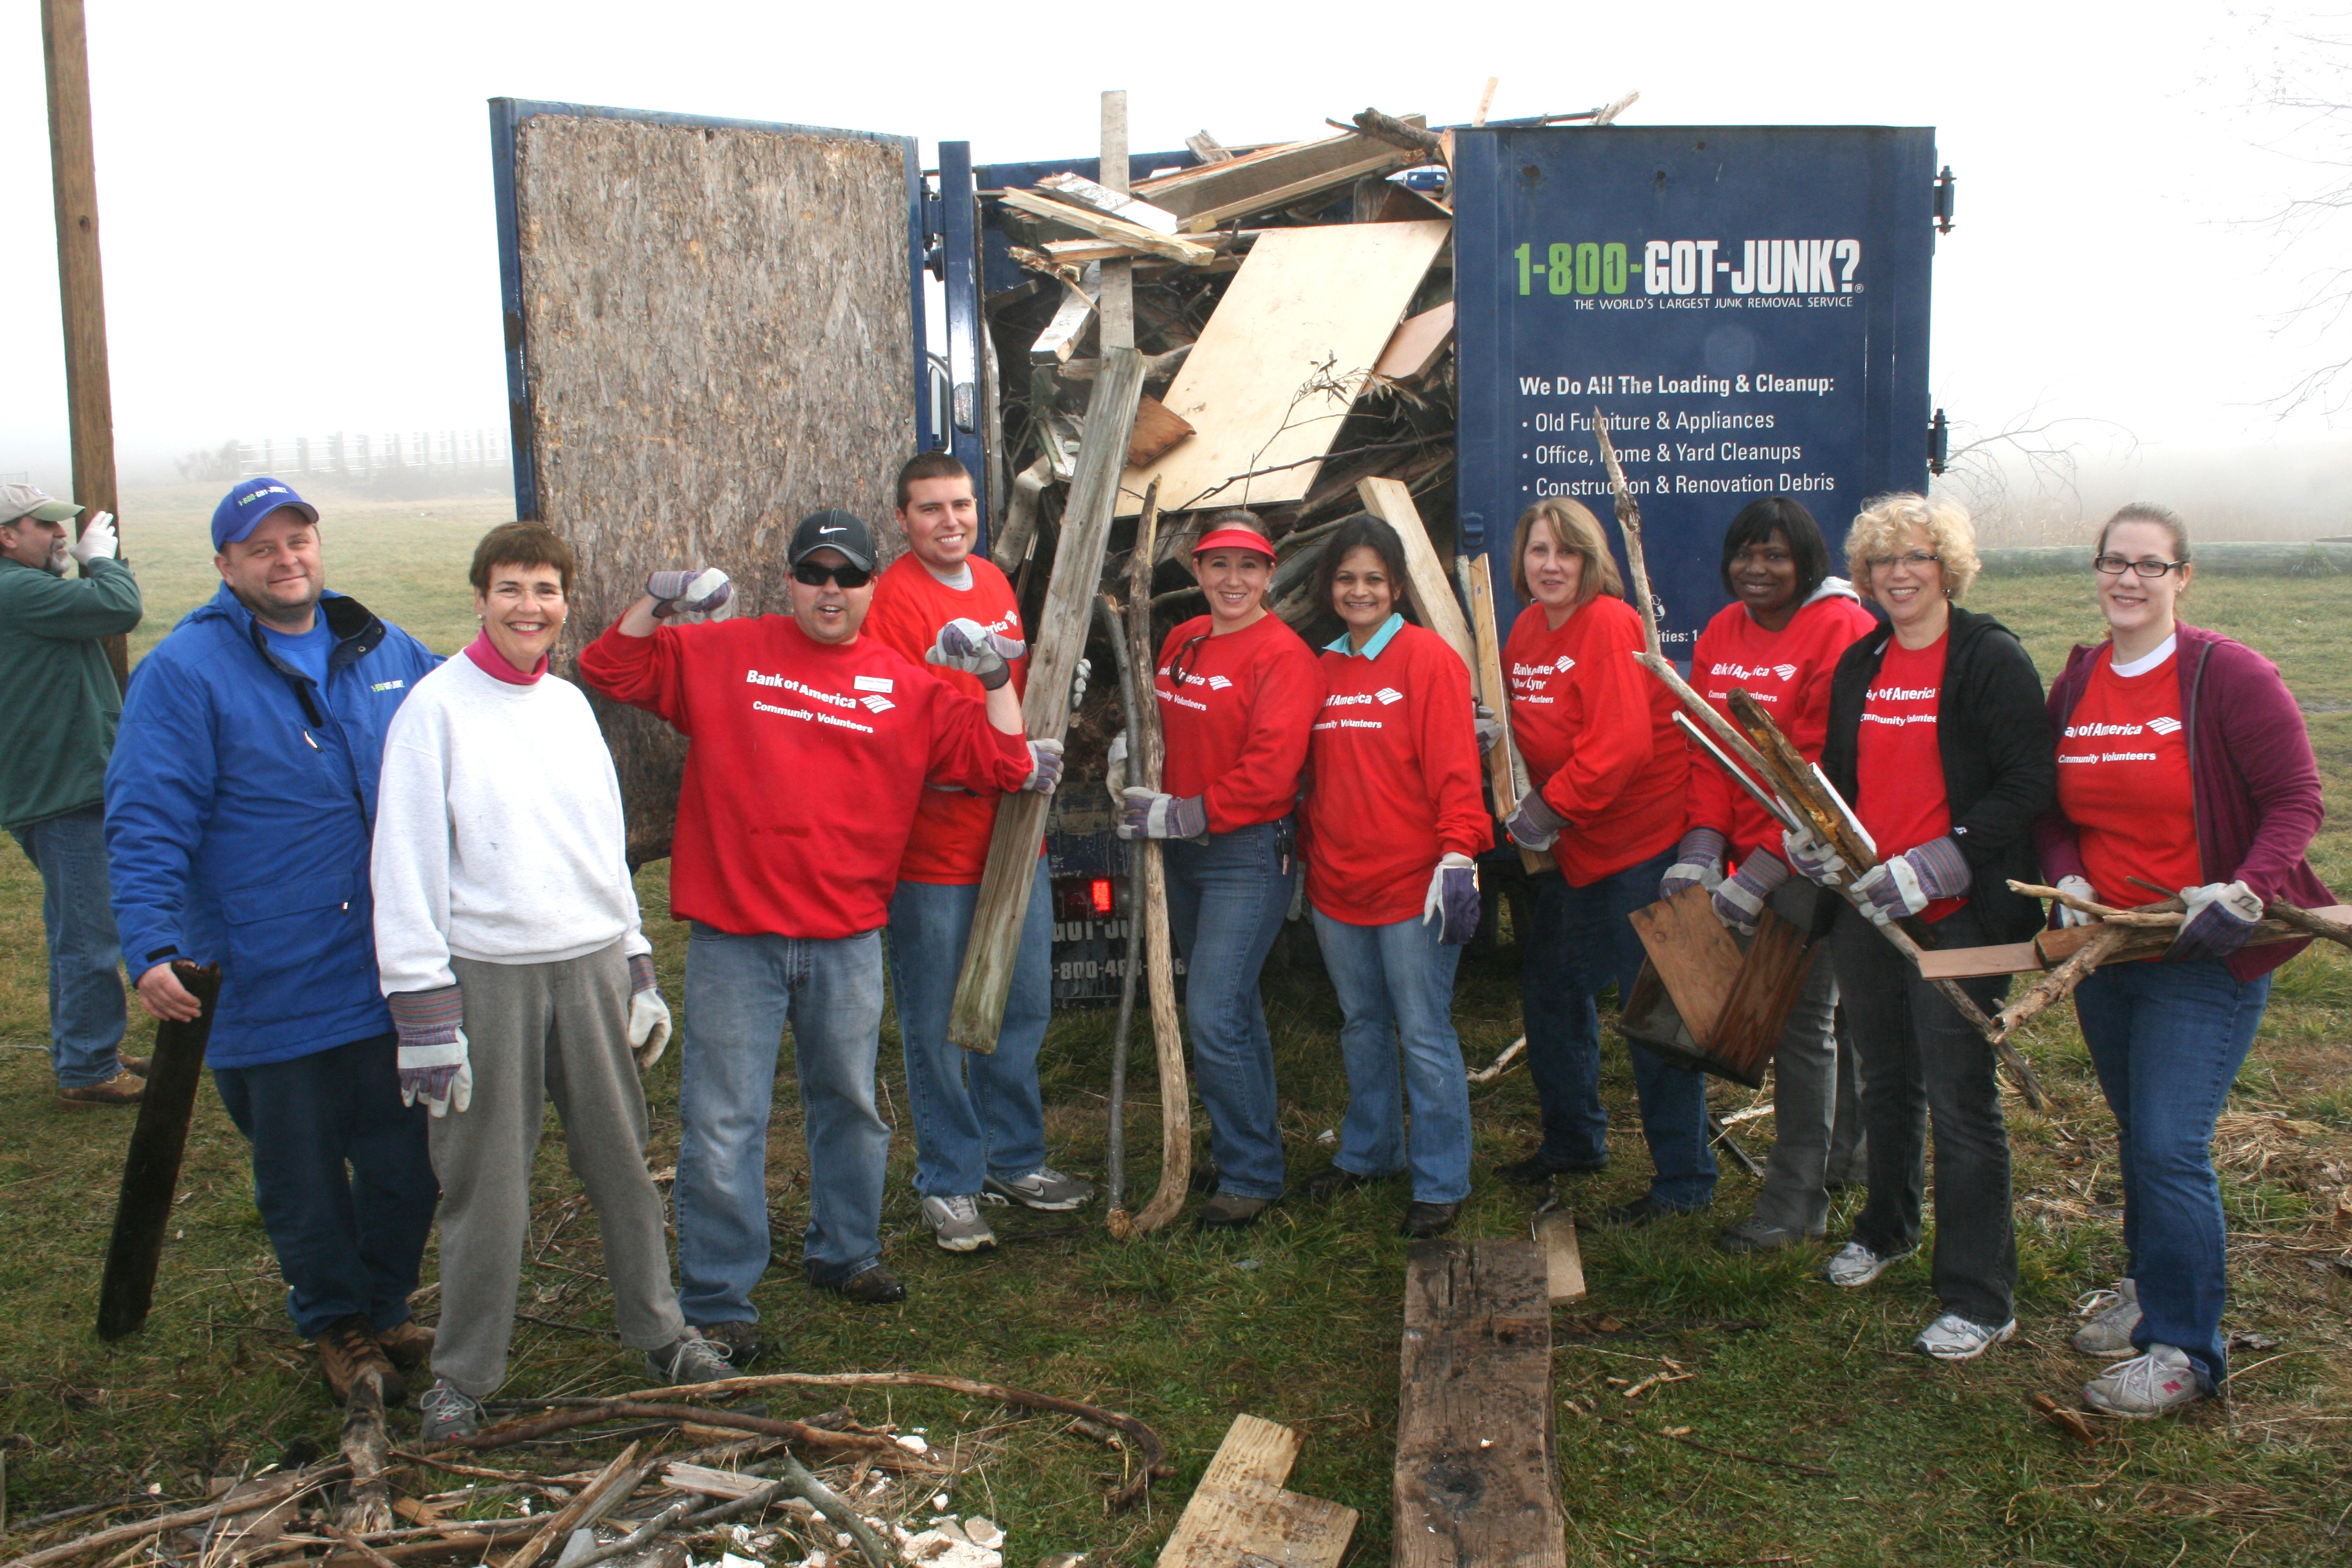 Bank of America volunteers pitching-in after Sandy.